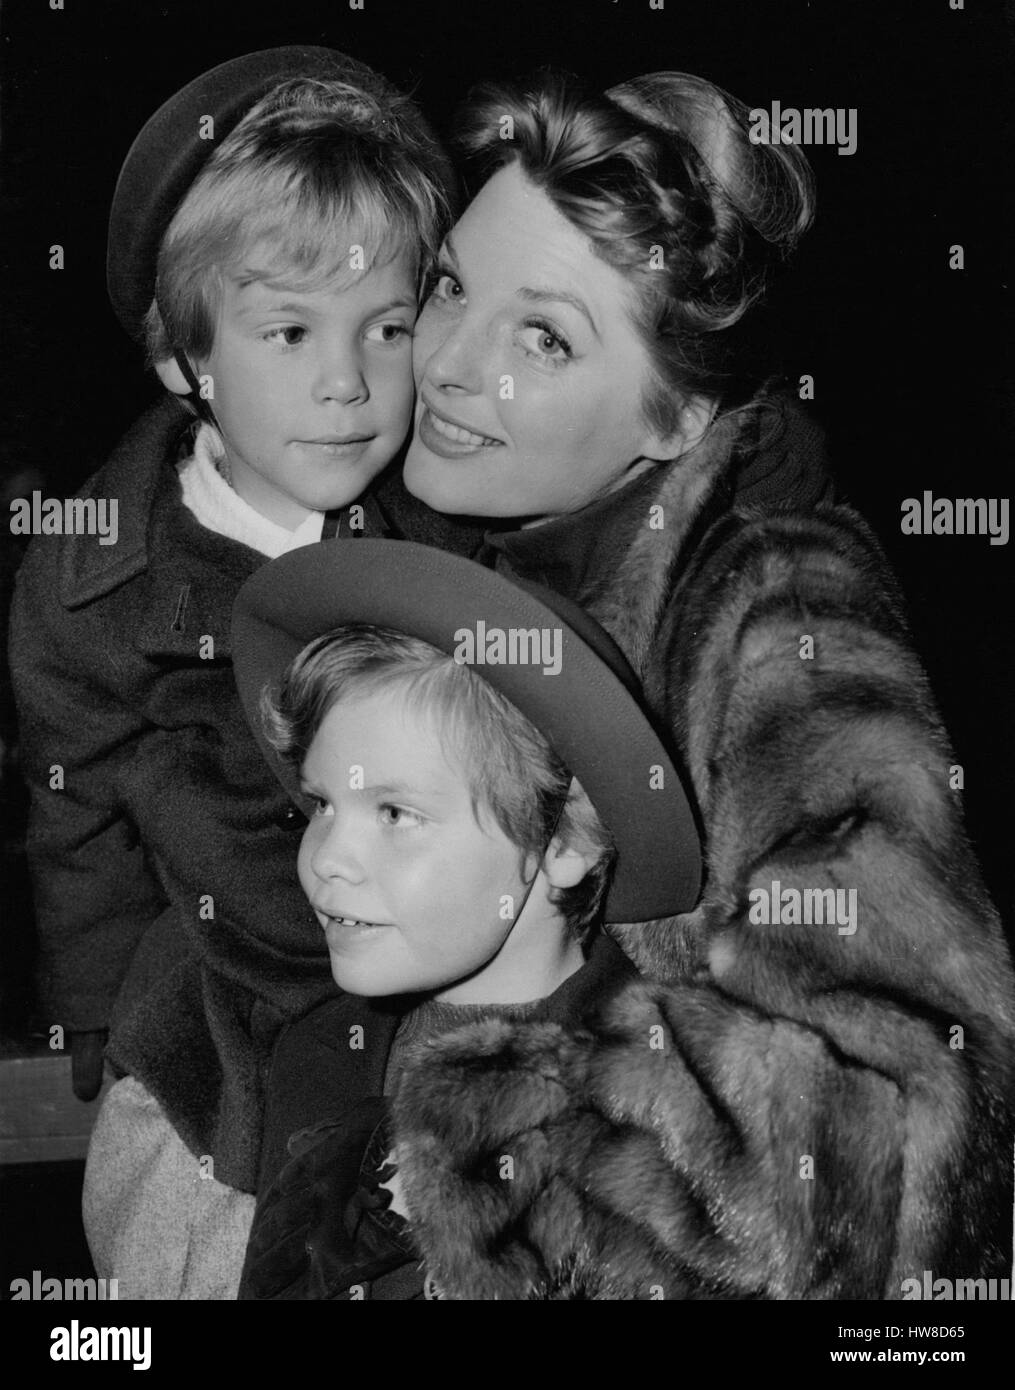 Nov. 11, 1957 - American Singing Star Arrives In London julie london At paddington: Julie London popular American singing star and her two children Lisa (5) and Stacy(8) arrived in London this morning- from the United States. She is to make her first British film here ''The Question of Adultery''. Photo shows. Julie London and children lisa (left) and Stacy on arrival at Paddington today. (Credit Image: © Keystone Press Agency/Keystone USA via ZUMAPRESS.com) Stock Photo